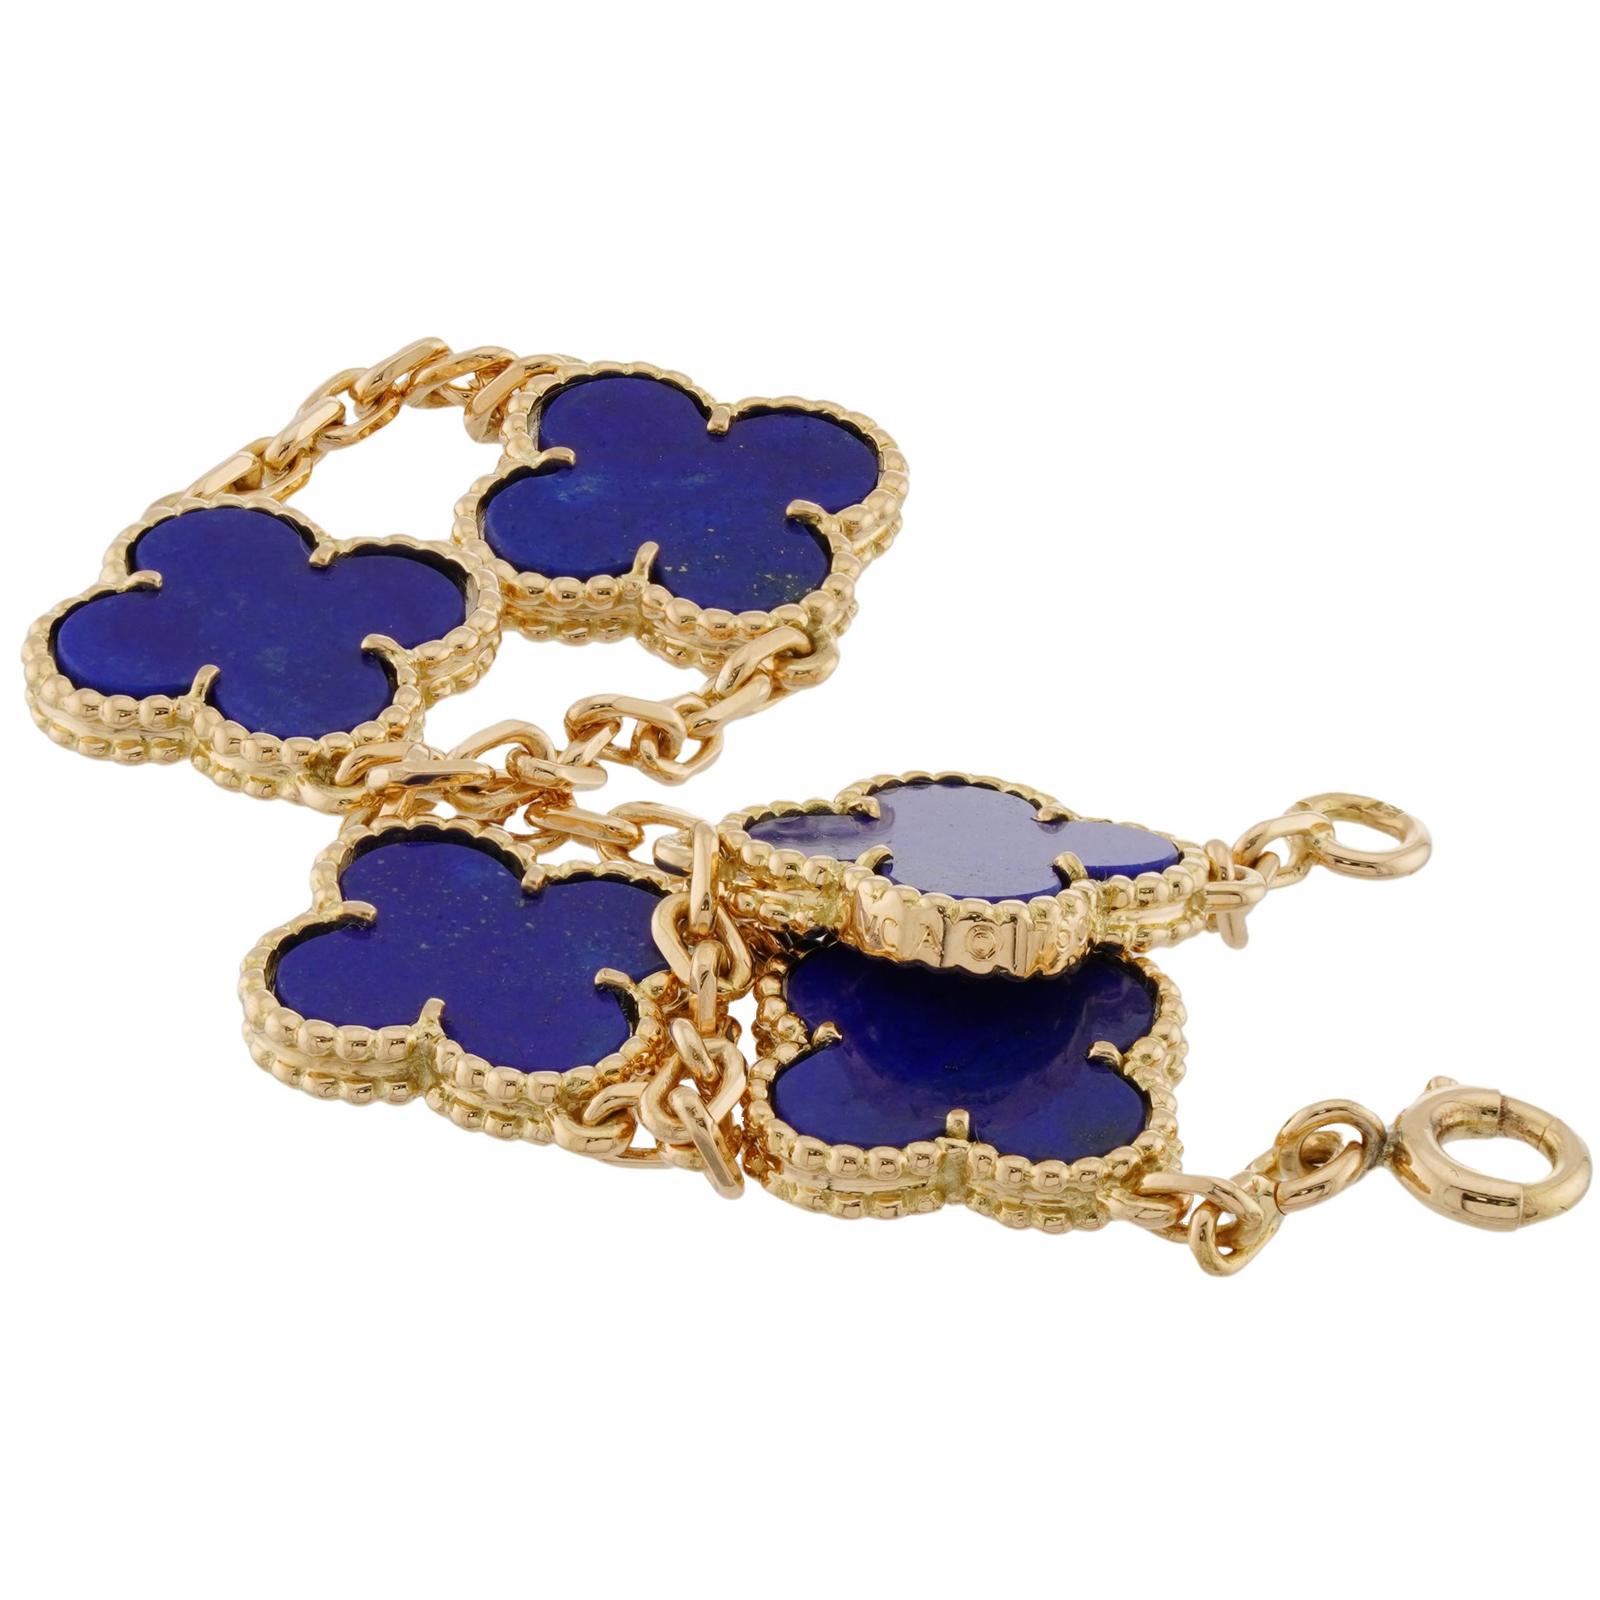 VAN CLEEF & ARPELS Vintage Alhambra Lapis Lazuli Yellow Gold 5-Motif Bracelet In Excellent Condition For Sale In New York, NY